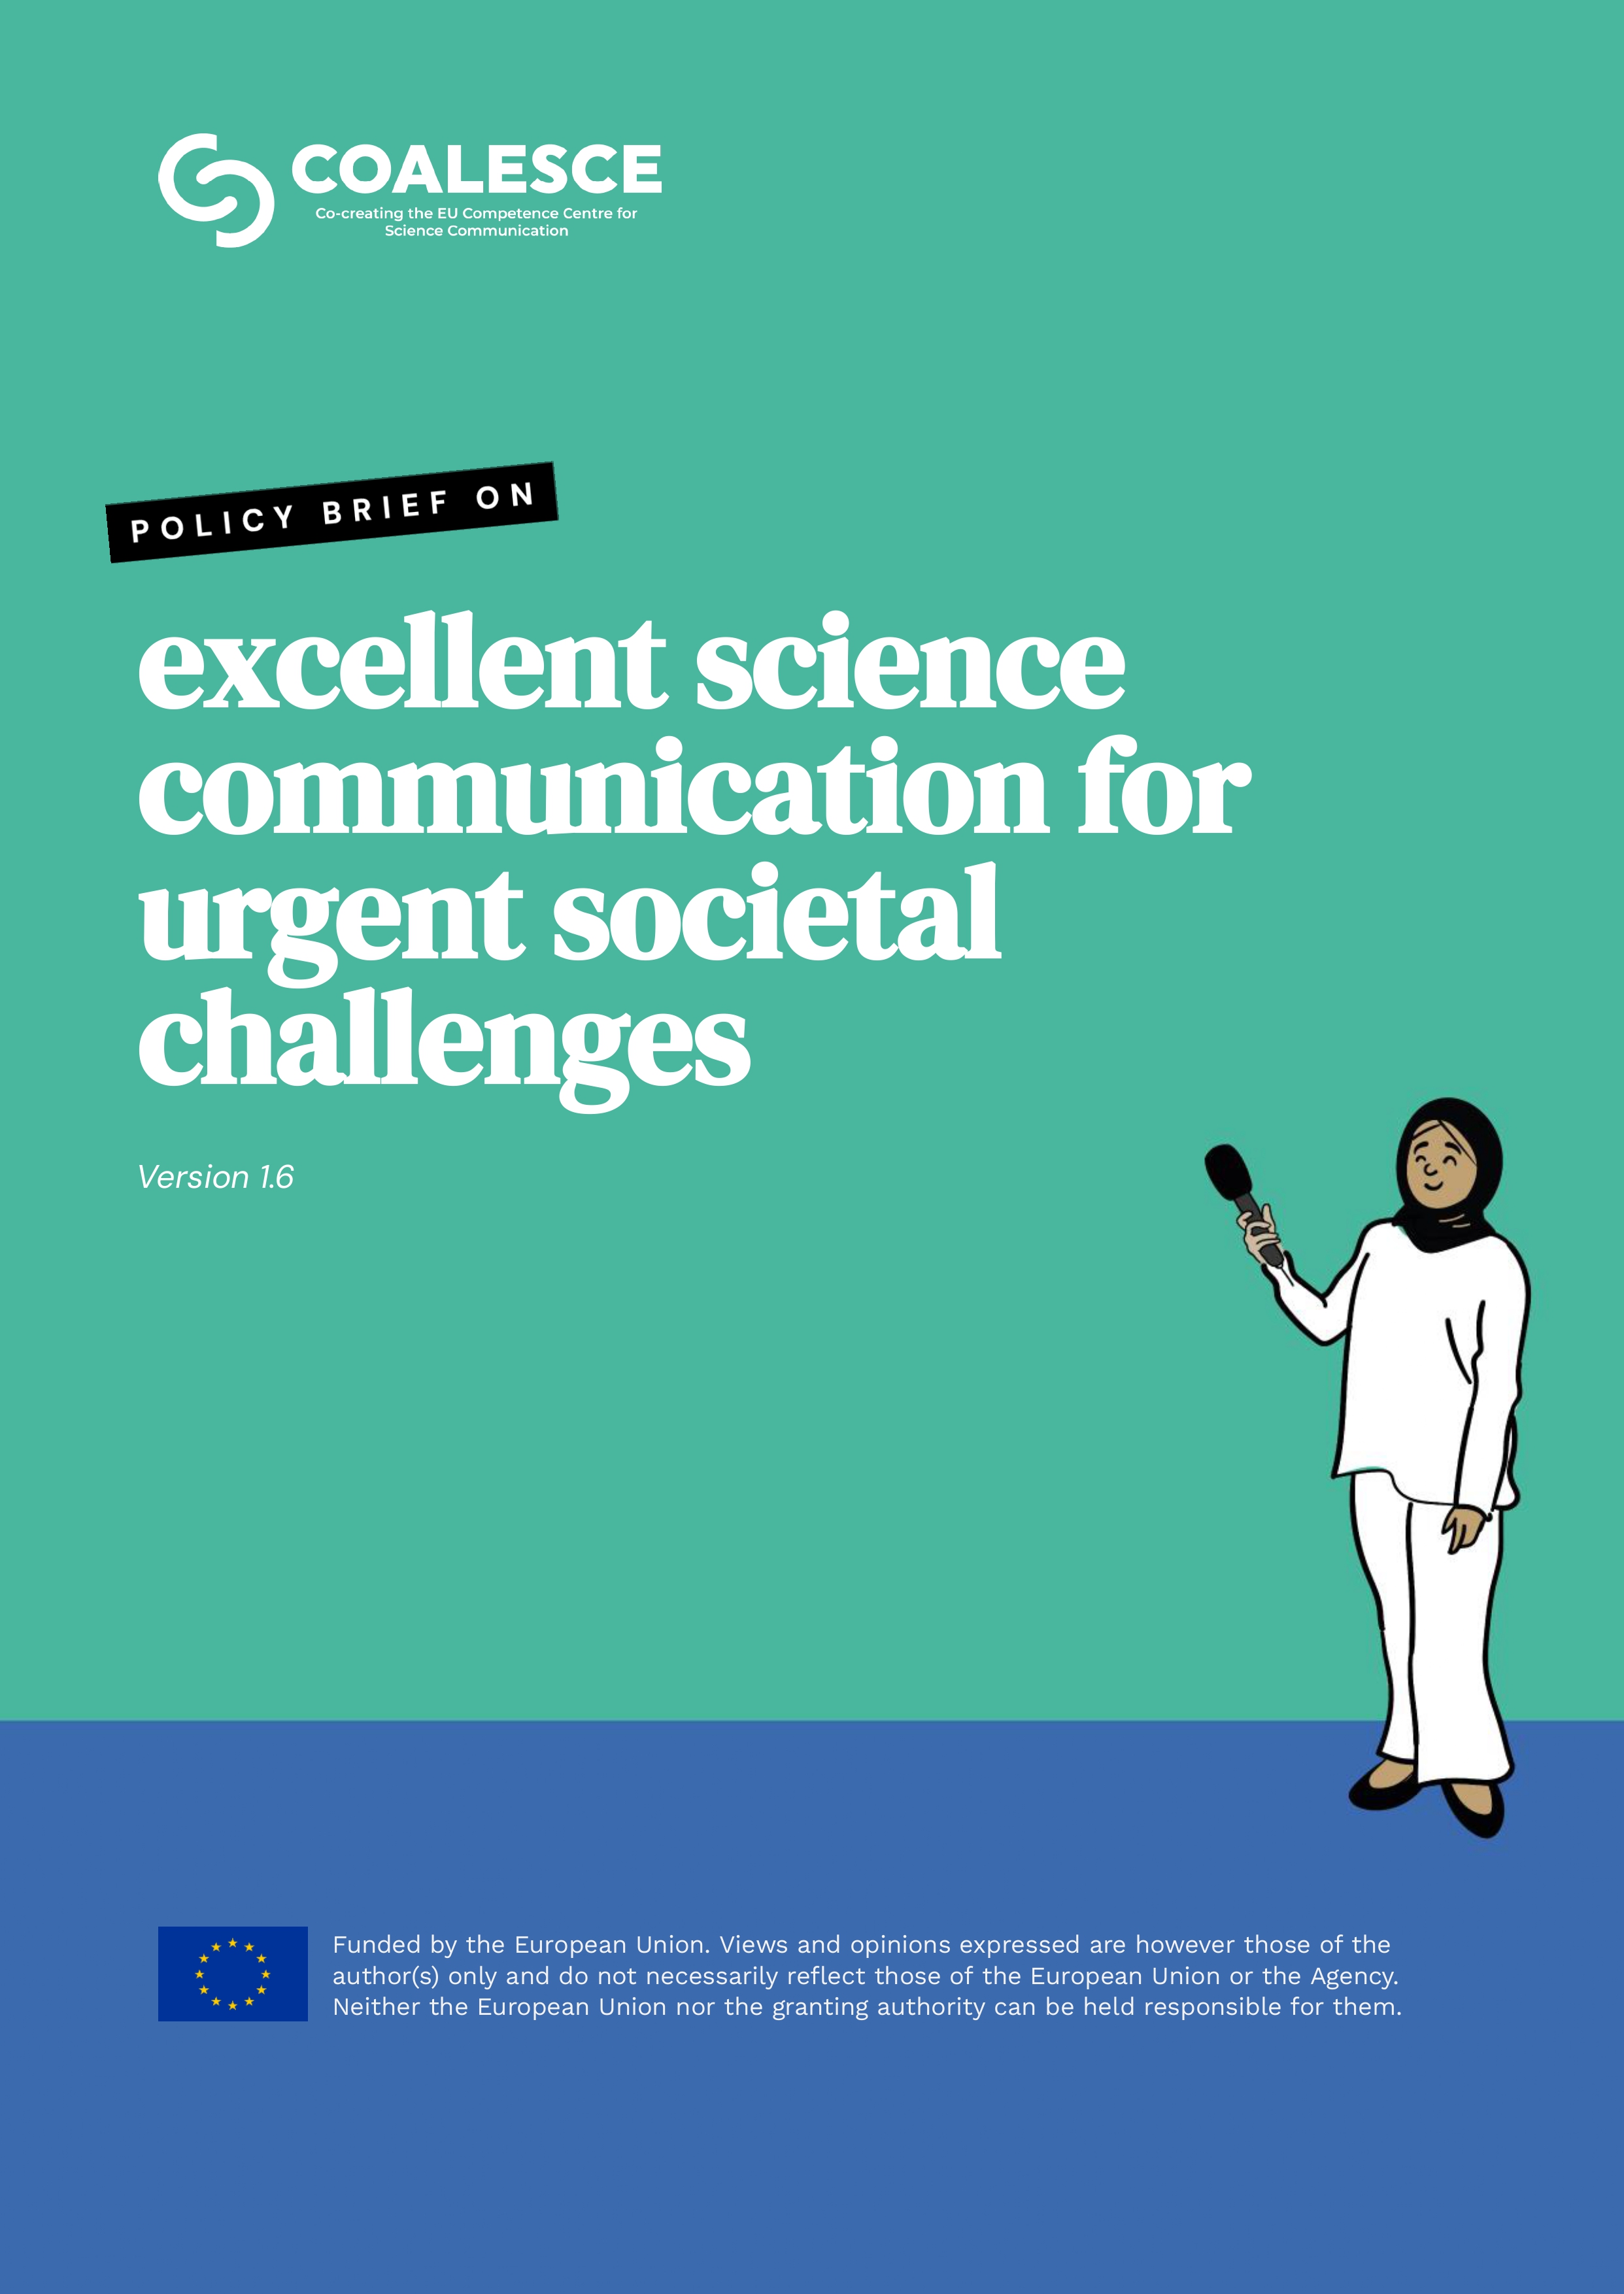 cover image of policy brief on "excellent science communication for urgent societal challenges"